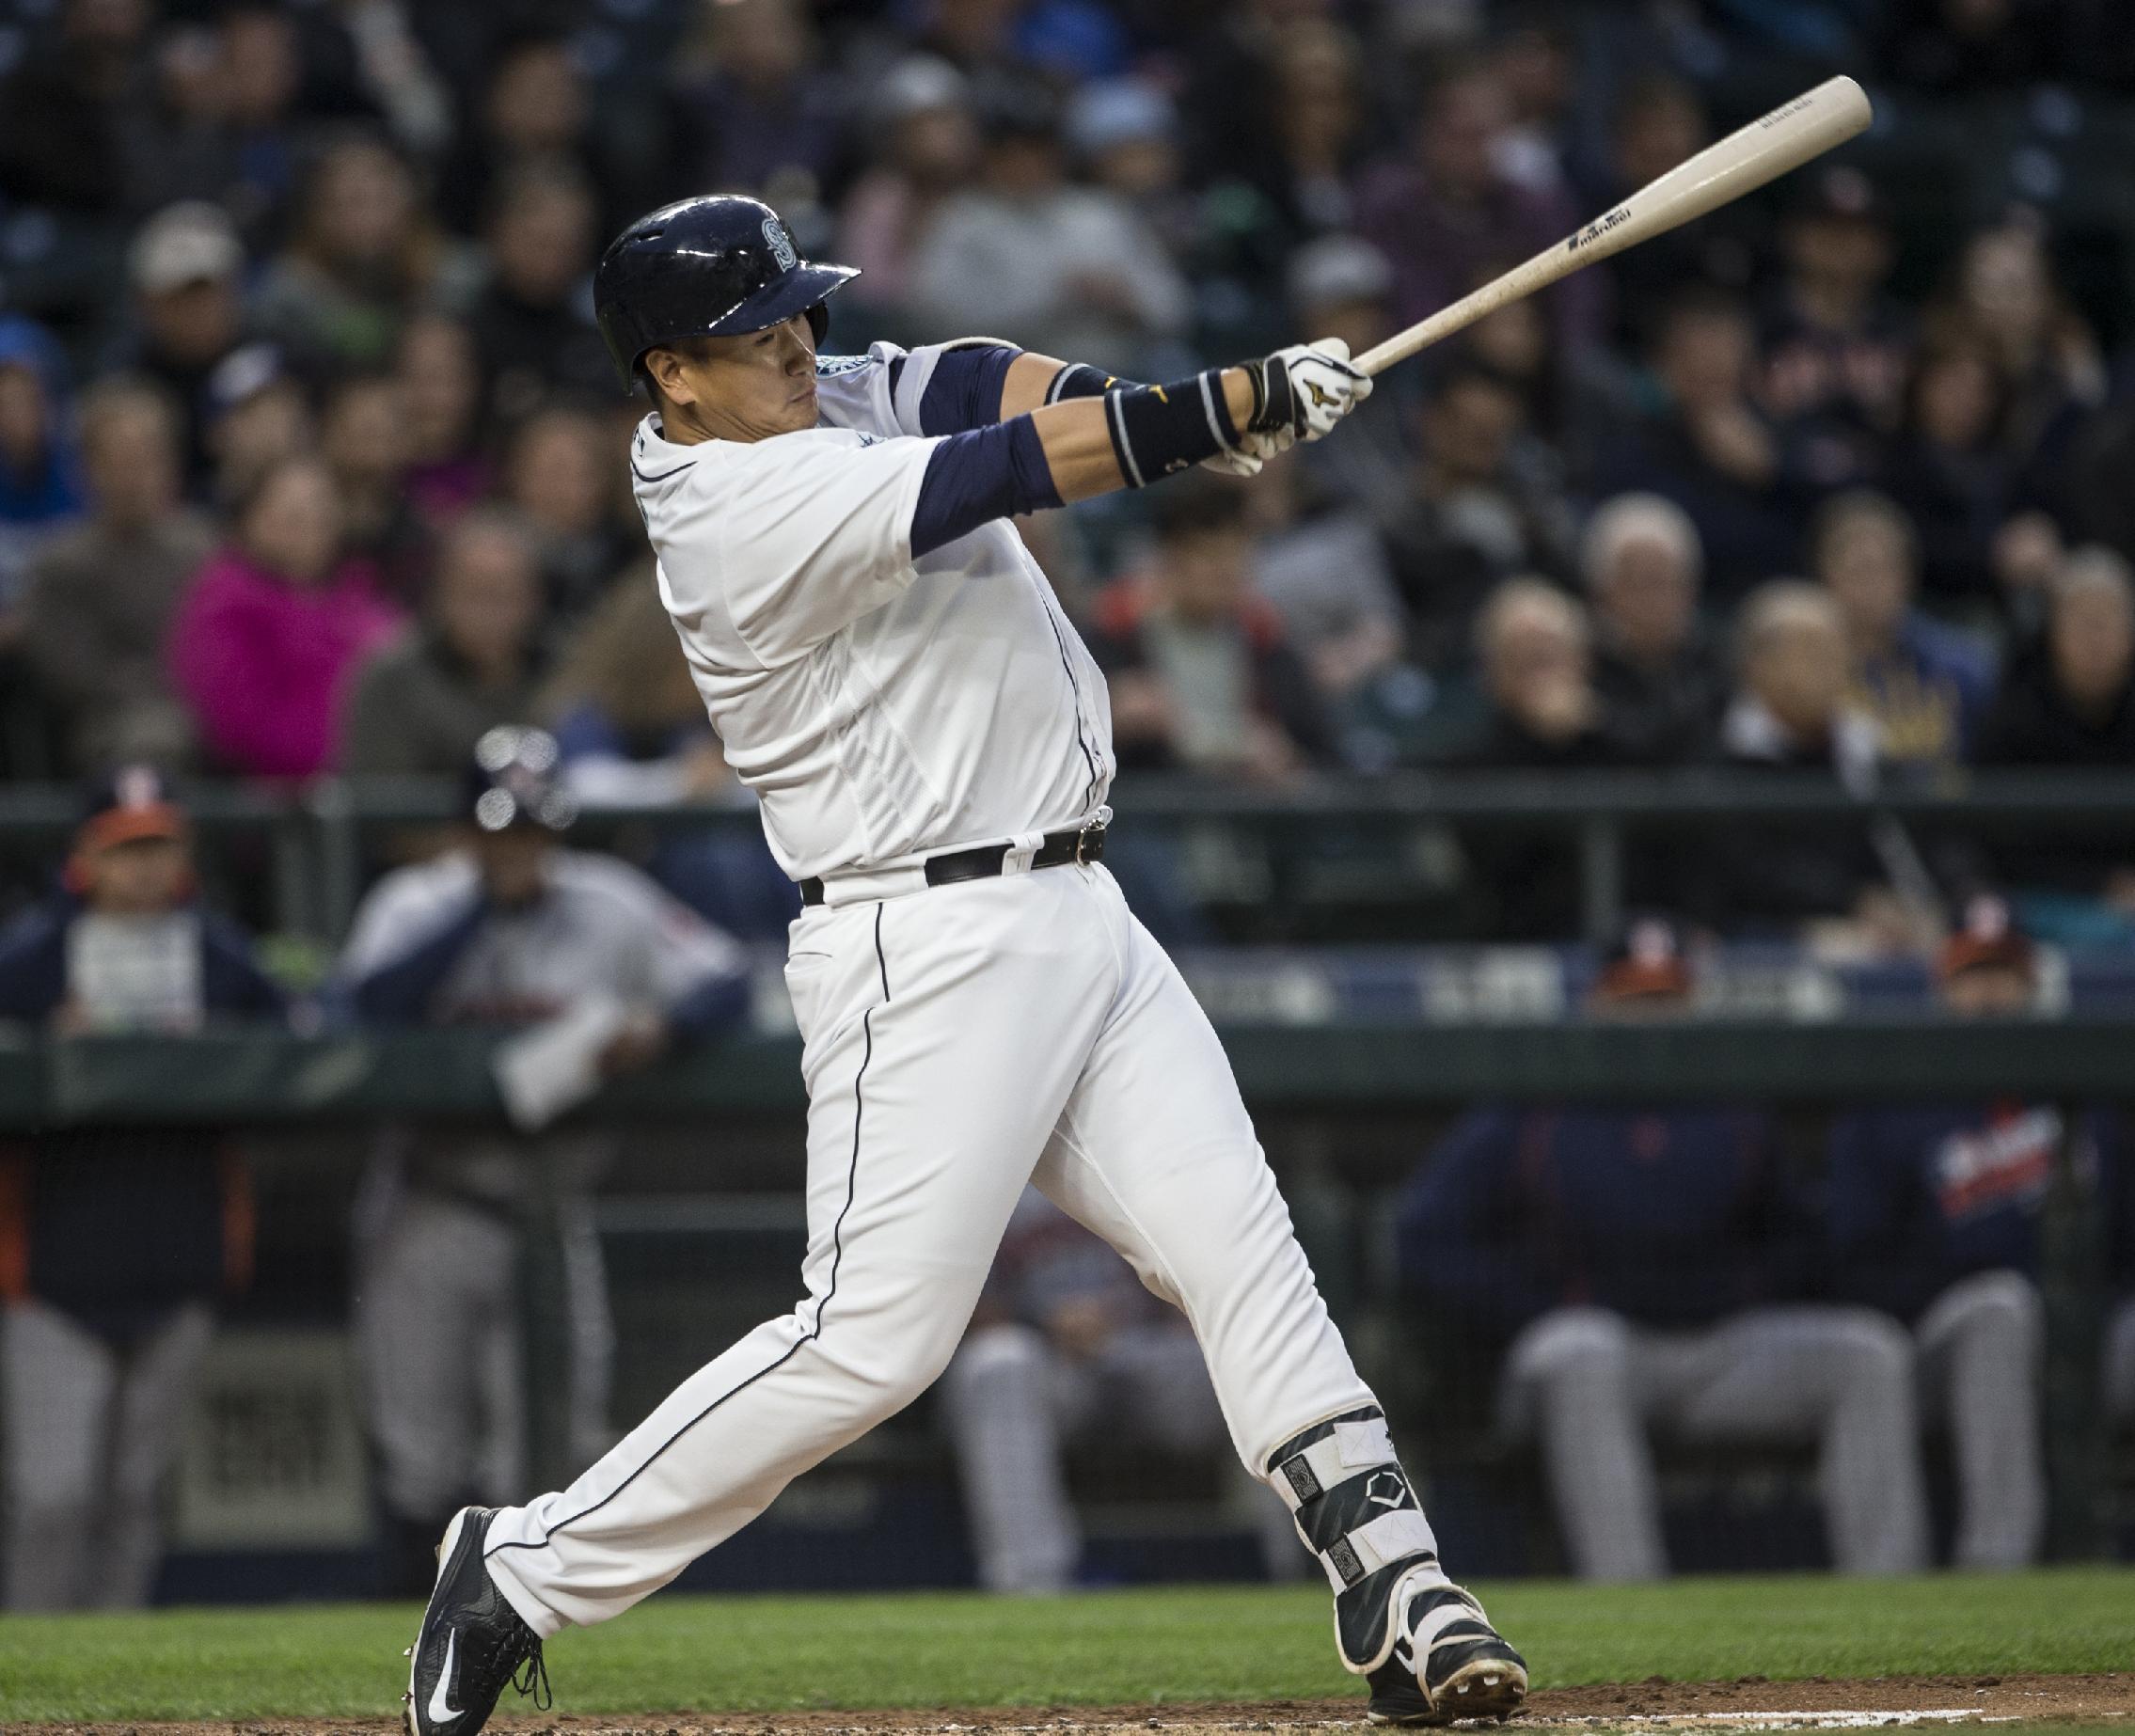 Dae-ho Lee of the Seattle Mariners takes a swing during an at-bat in the third inning. (Photo by Stephen Brashear/Getty Images)